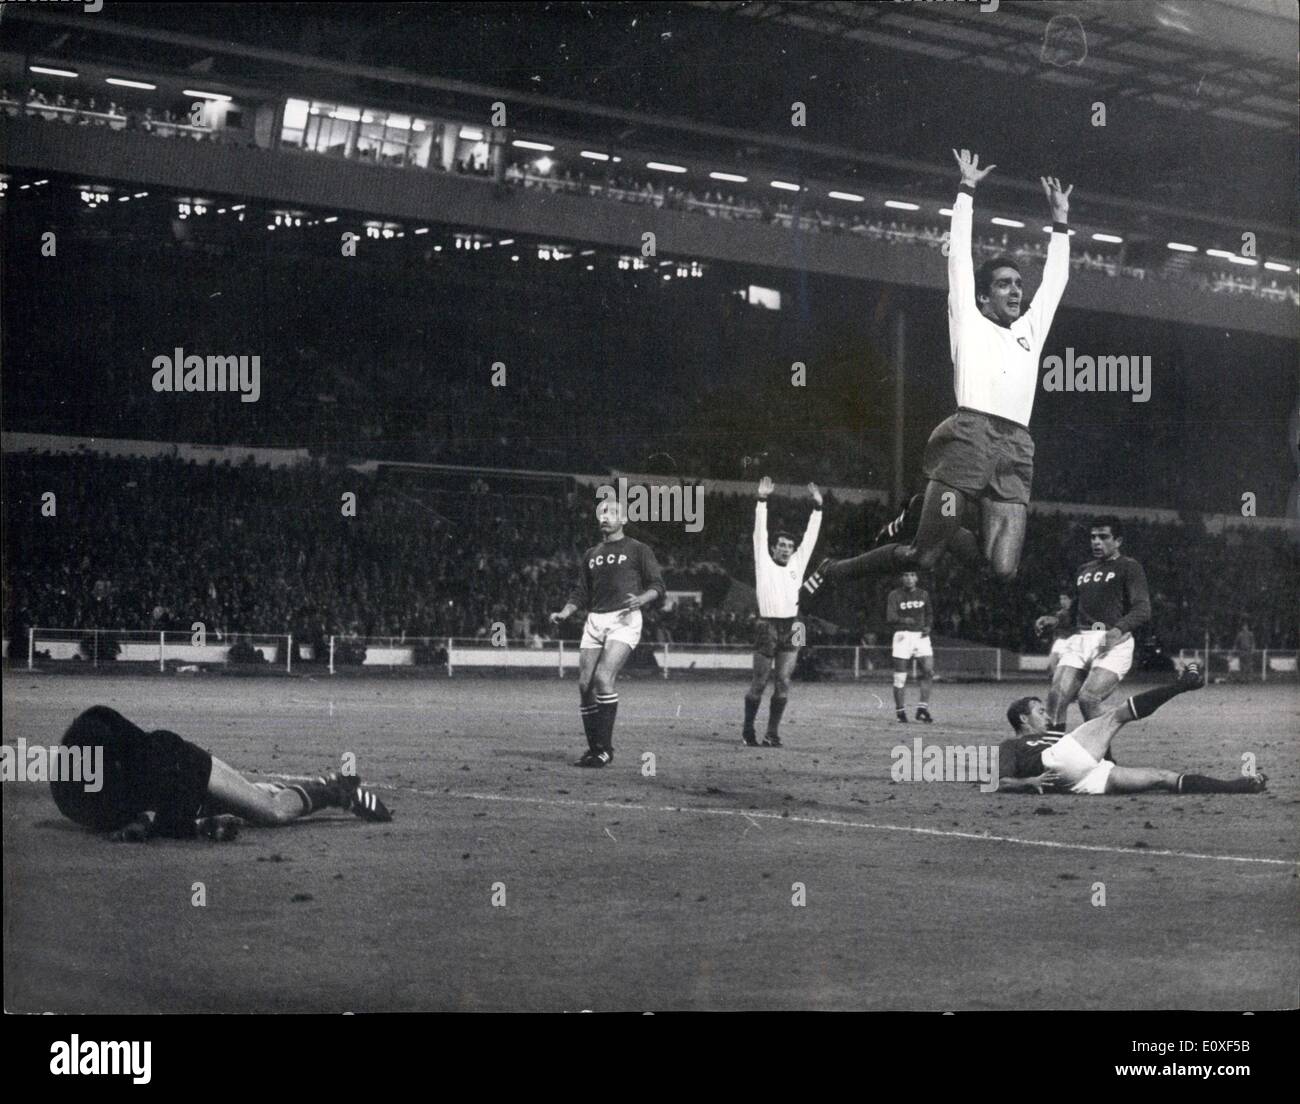 Jul. 29, 1966 - World Cup Football: Third Place Final. Portugal Vs. Russia at Wembley Stadium. Portugal won 2-1. Photo Shows Jose Torres (Portugal) leaps high in the air after he had scored Portugal's of the match, at Wembley last night. Stock Photo